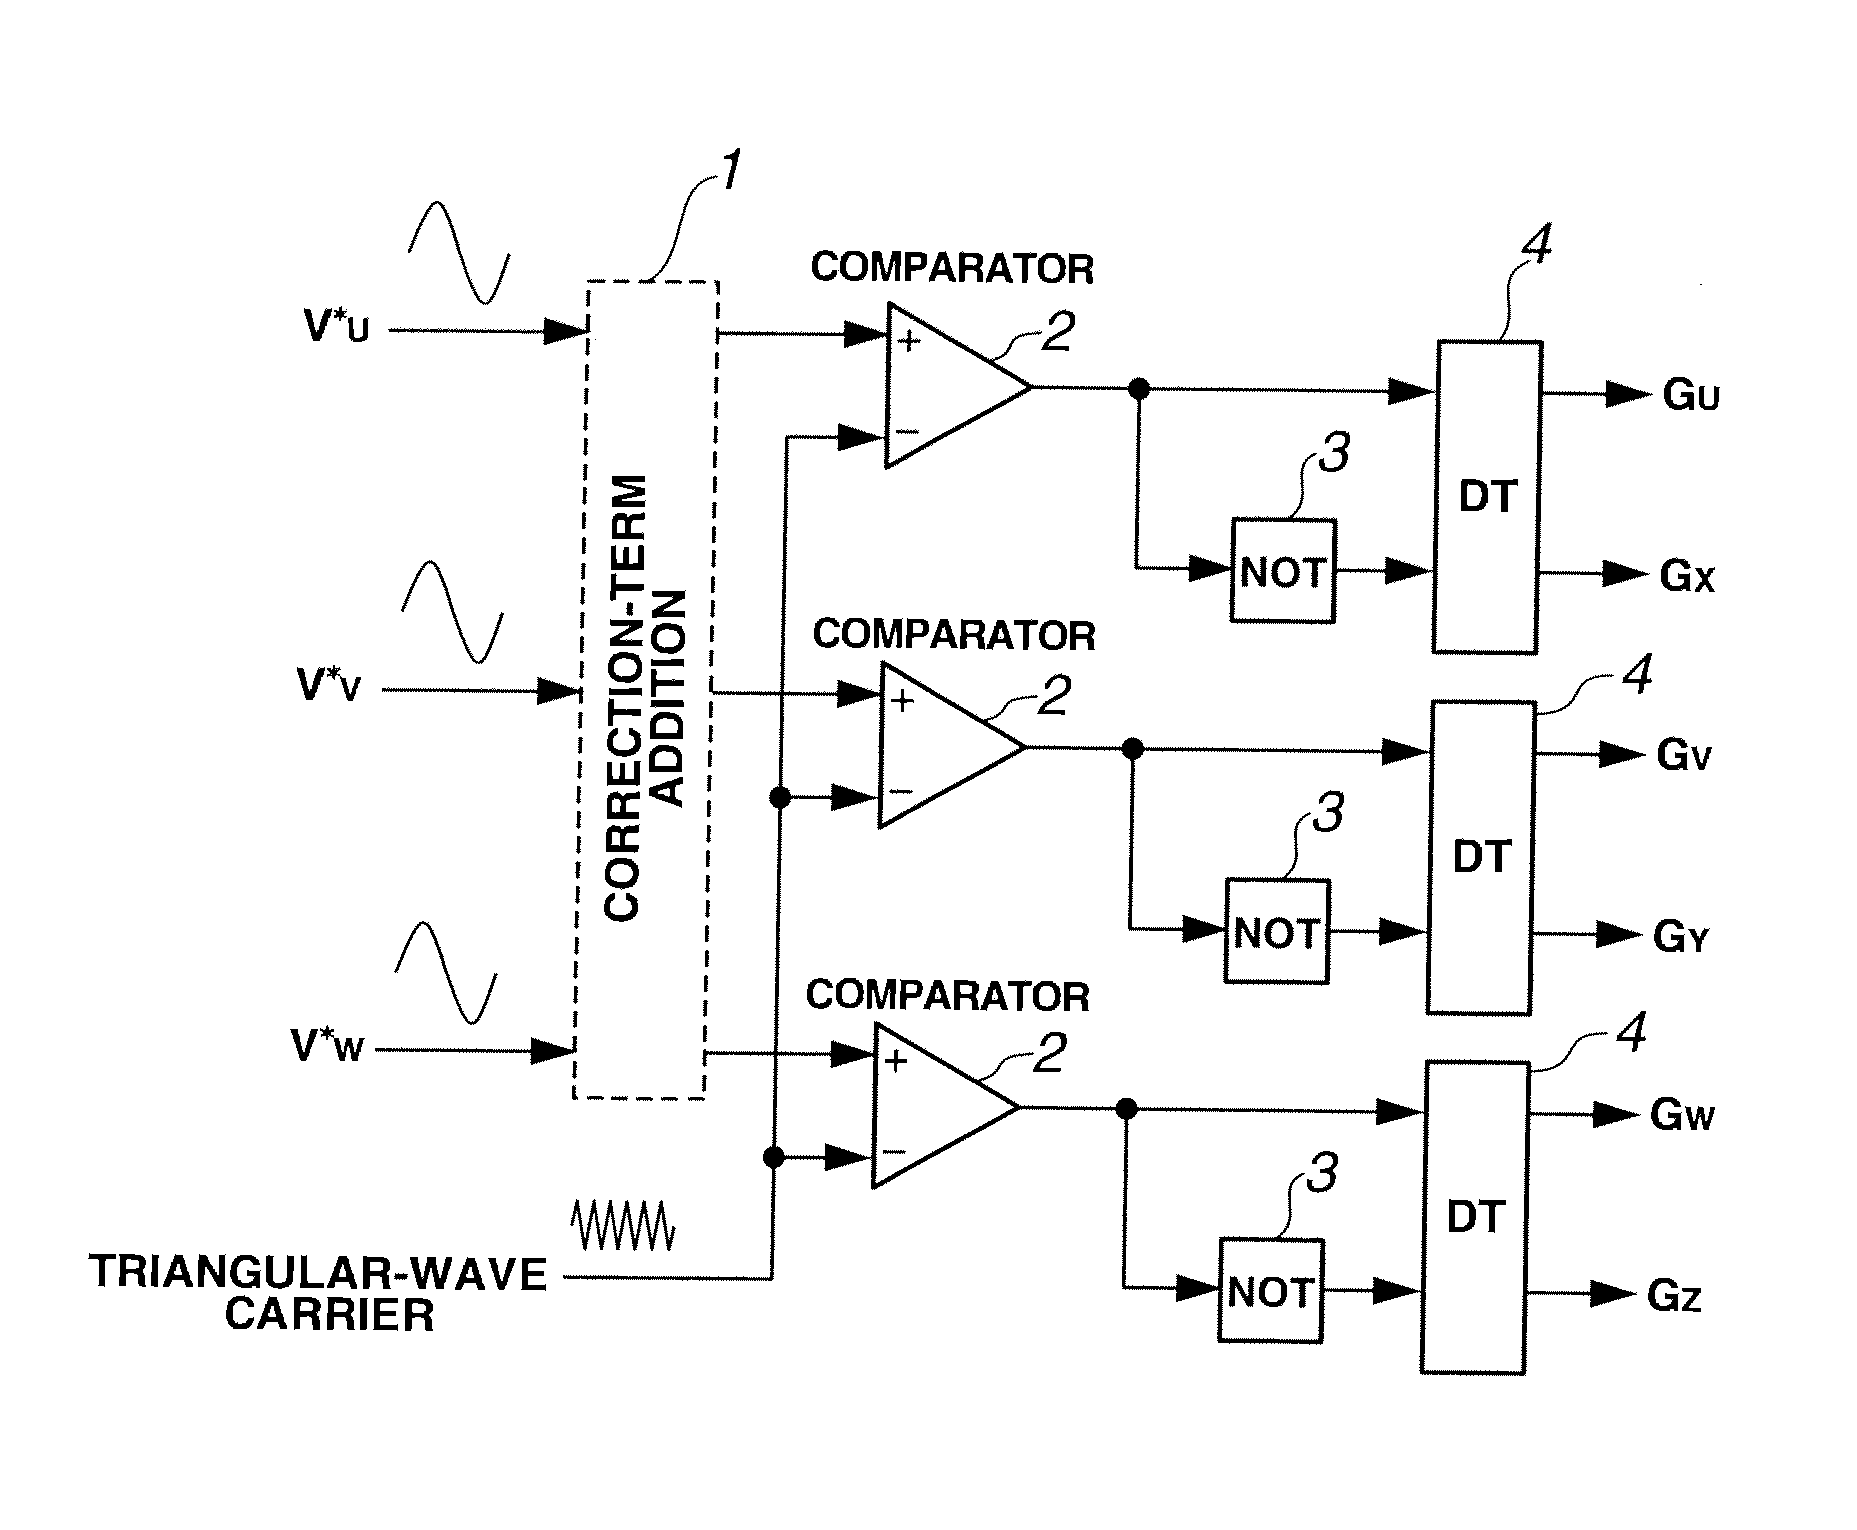 Method of controlling power conversion device